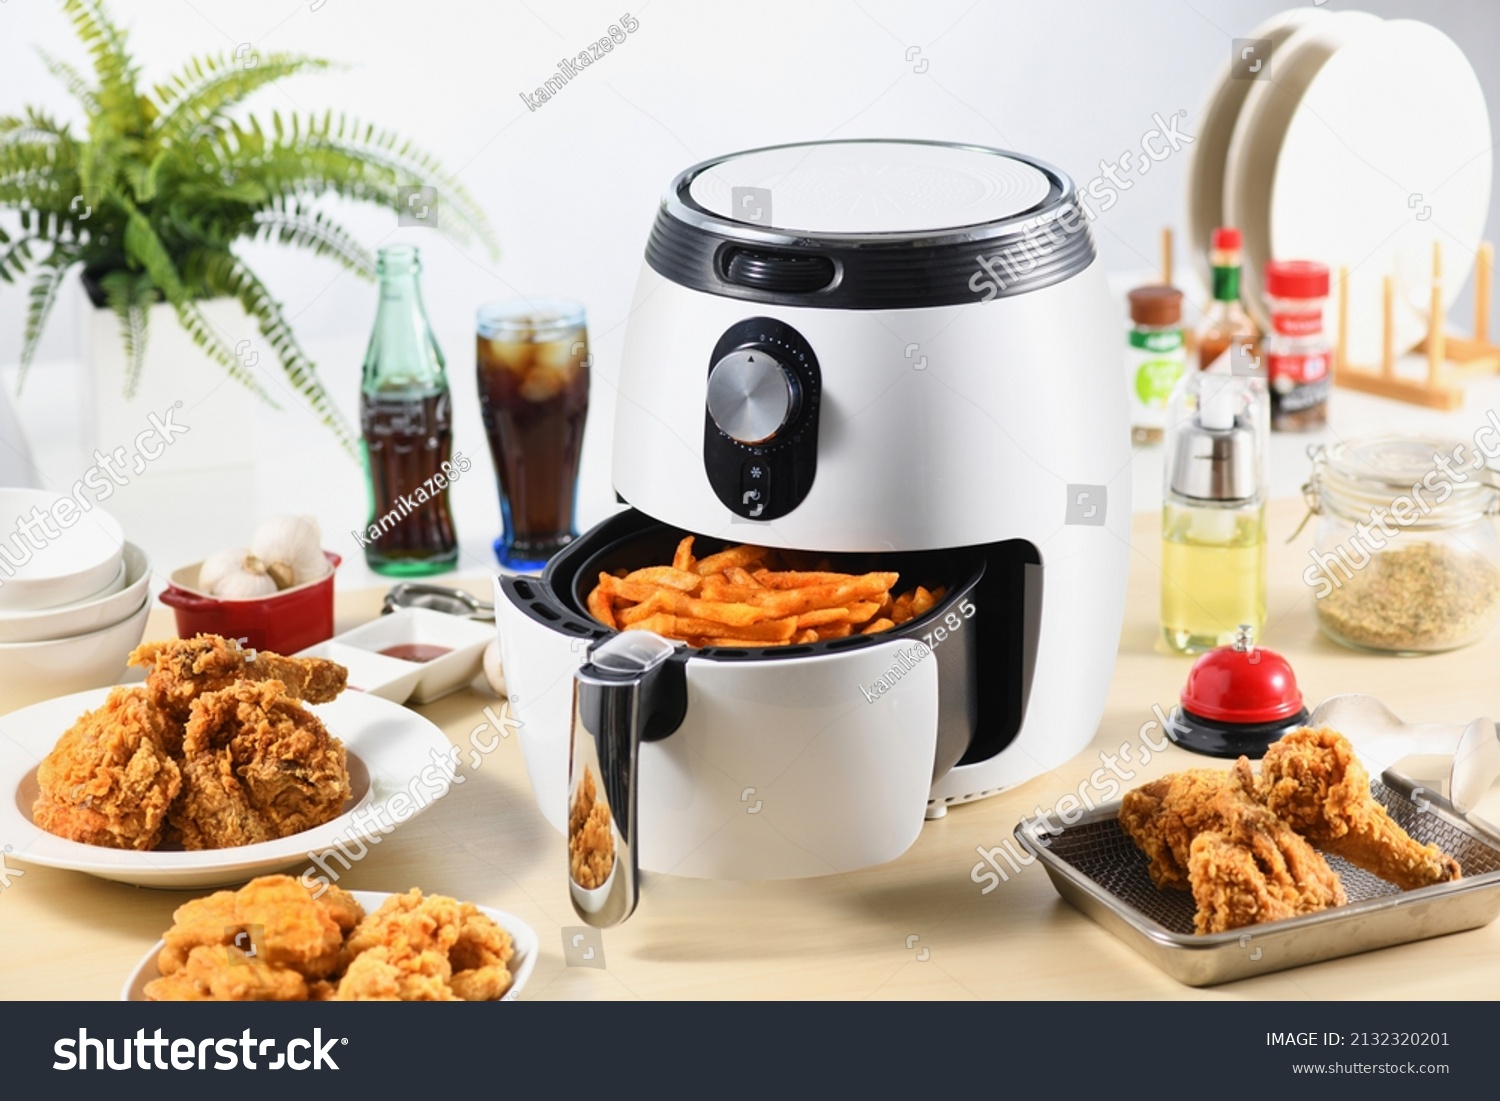 Air fryer with fried breaded chicken #2132320201